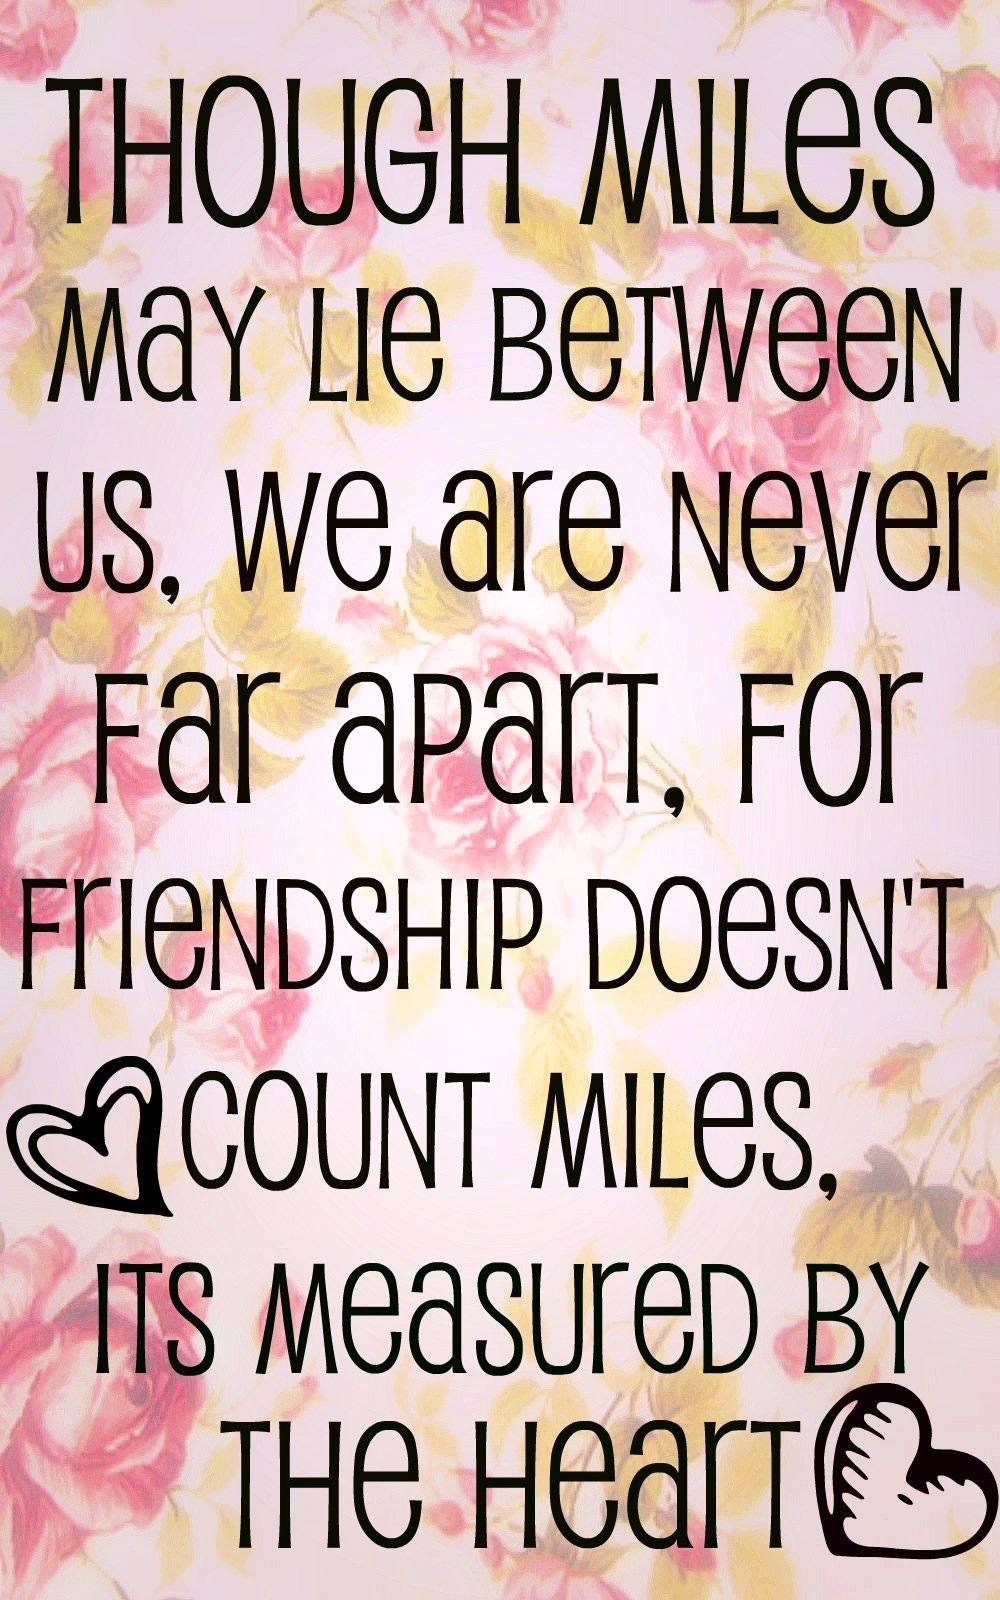 Long Distance Friendship Quote by mattielynngray